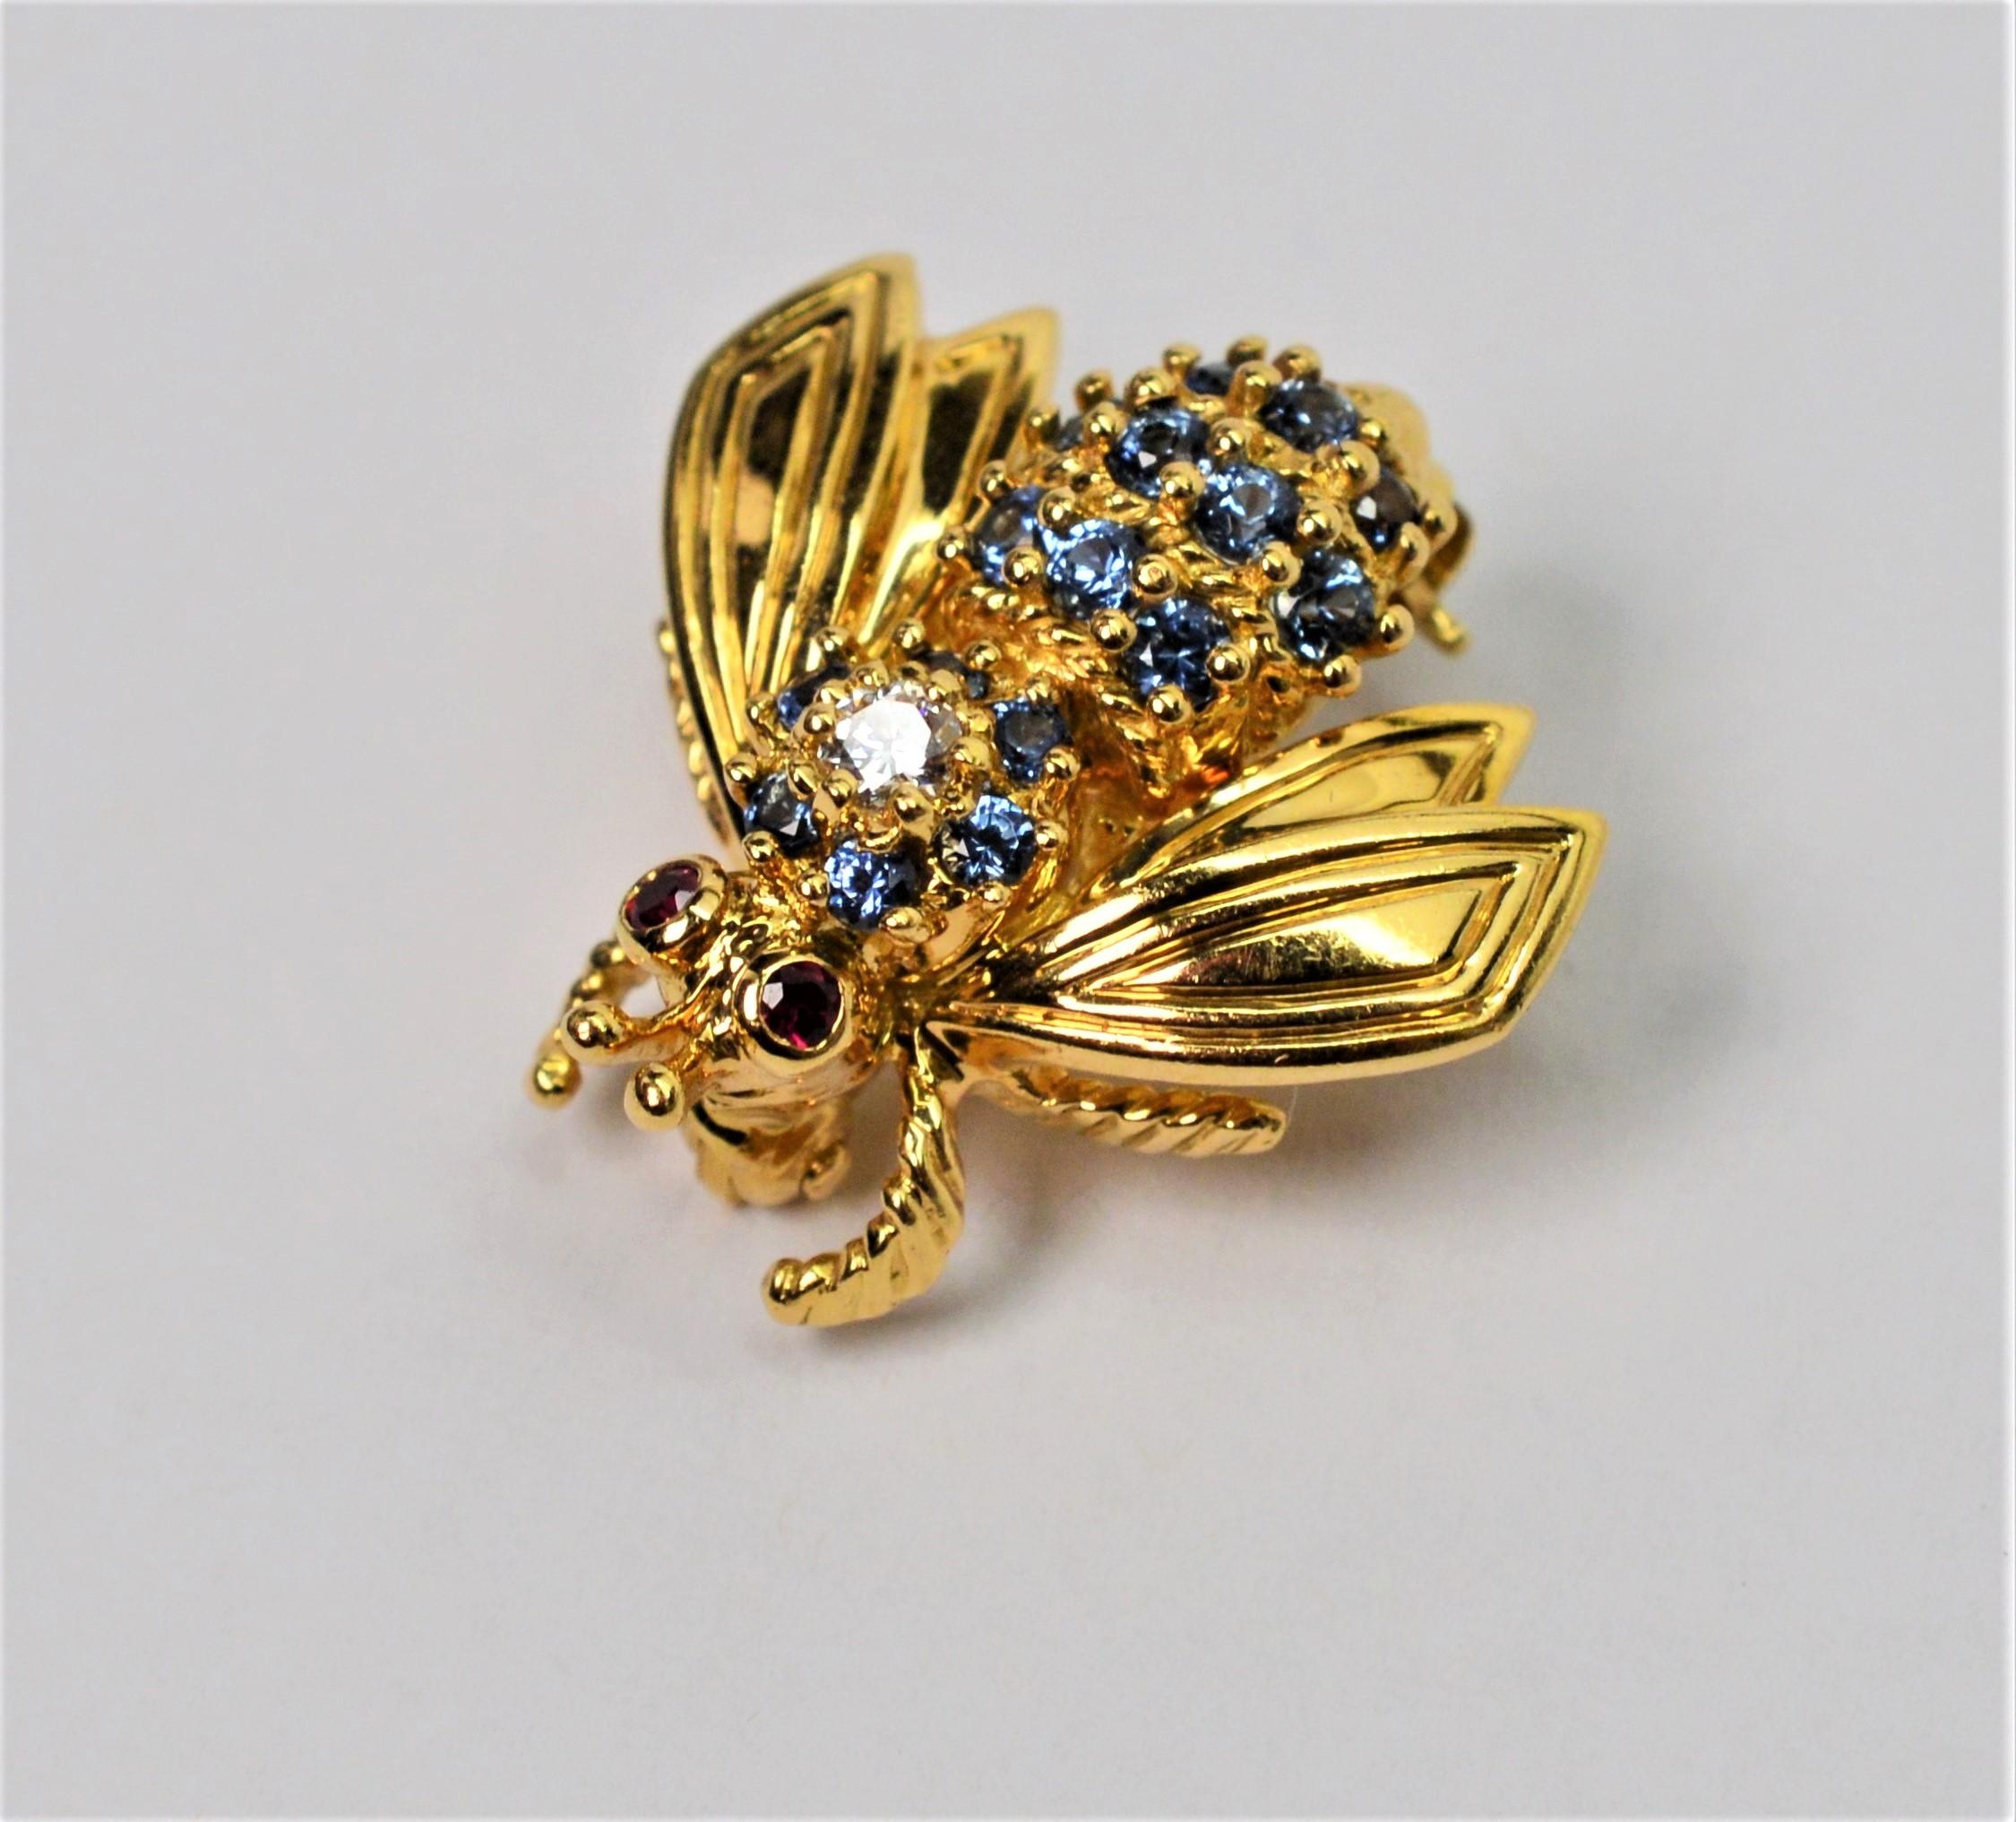 Eighteen karat yellow gold Tiffany & Company Bee Pin Brooch with blue sapphires and diamond on back with ruby eyes. Mint condition.
In gift box.